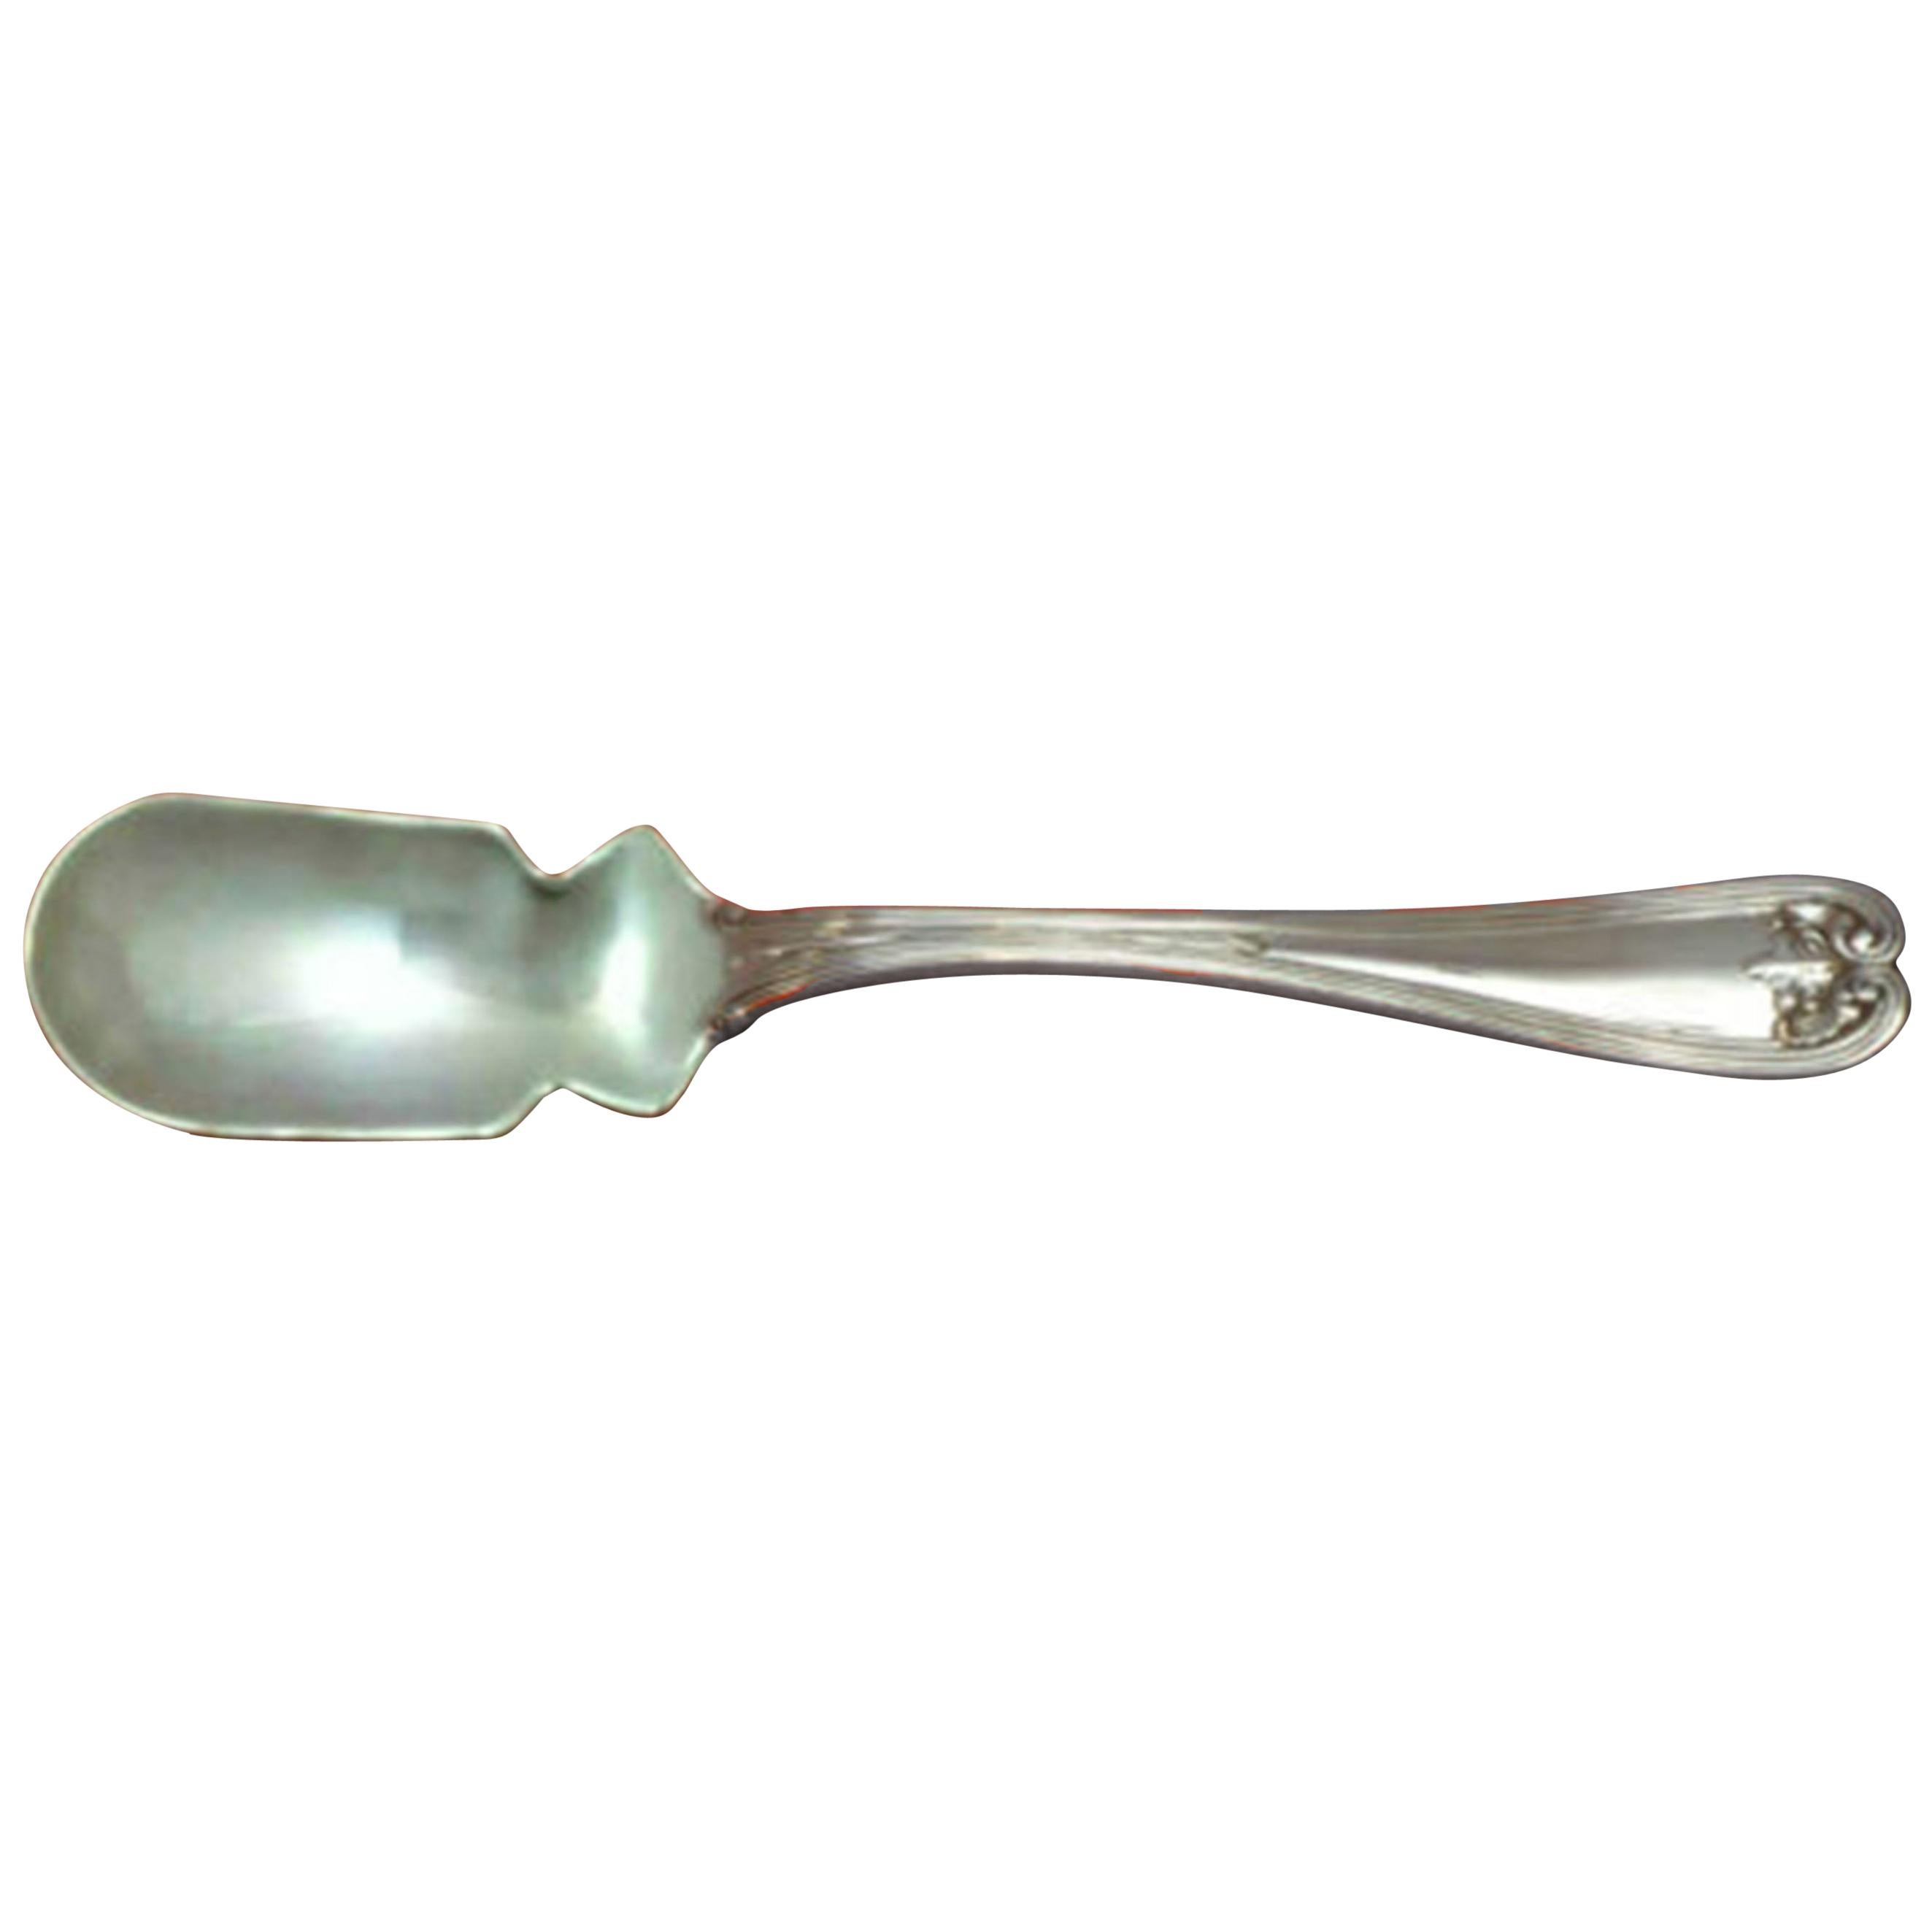 Colonial by Tiffany & Co. Sterling Silver Horseradish Scoop Custom Made 5 3/4"